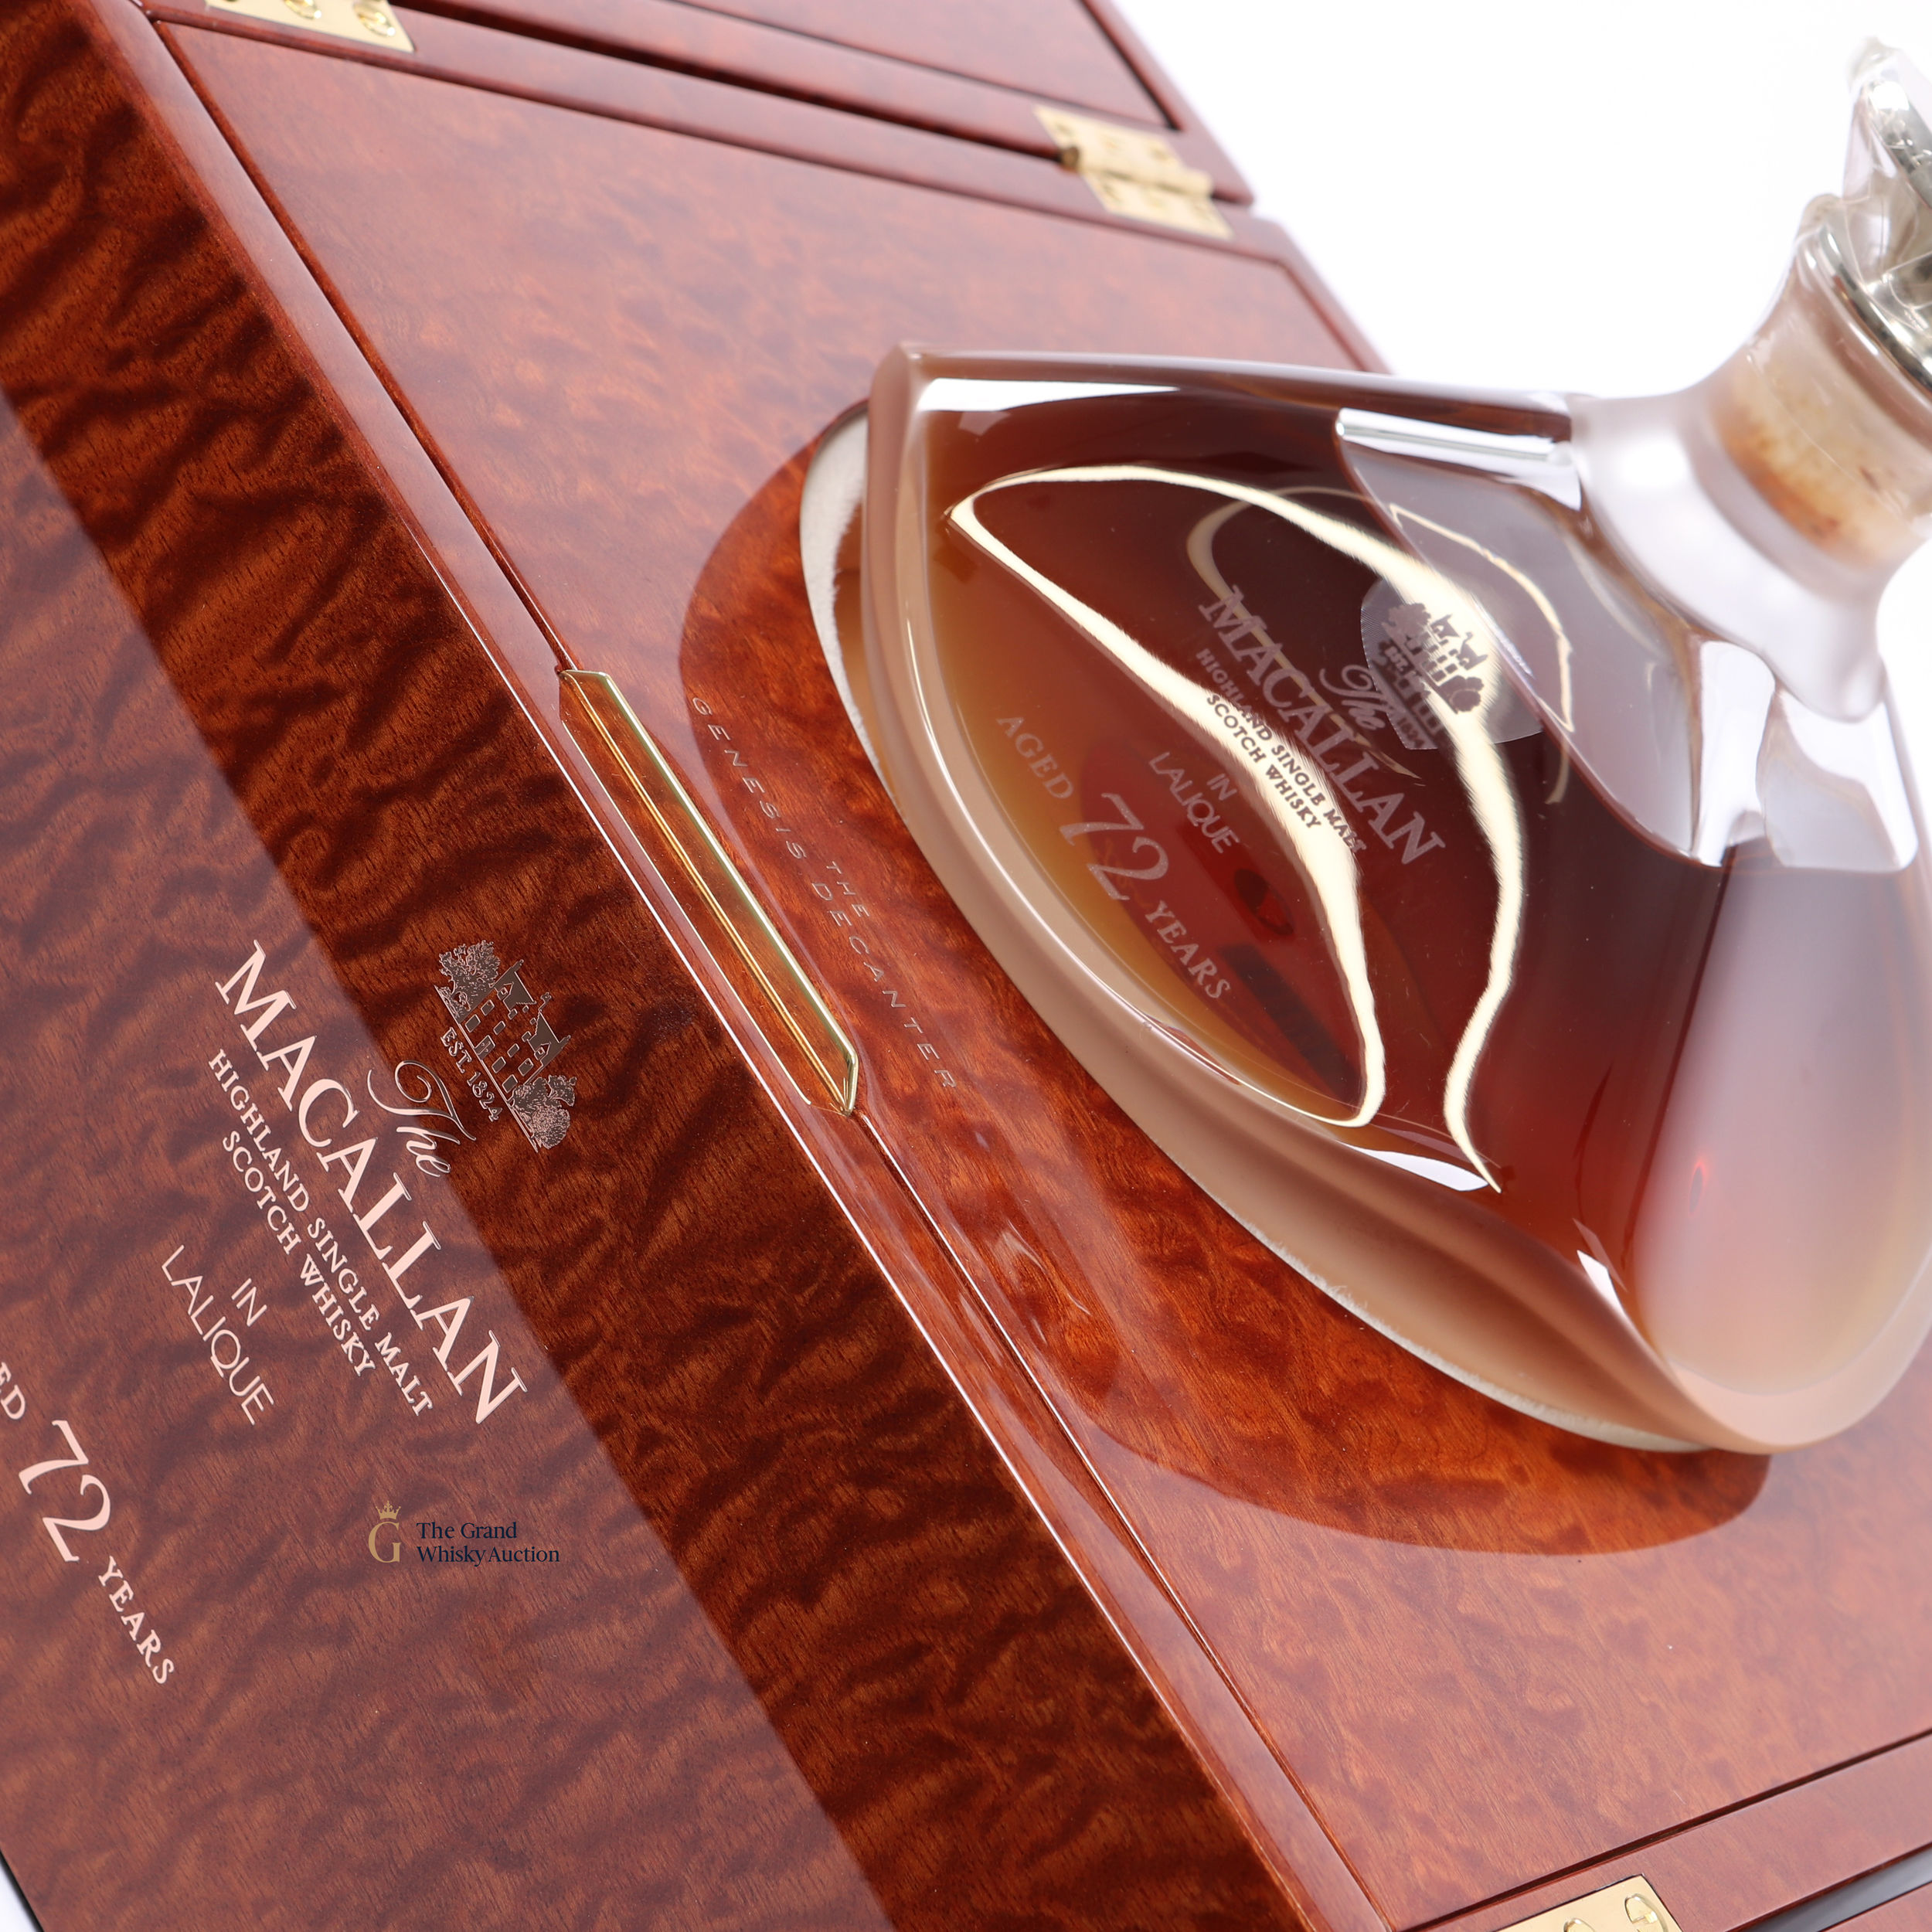 Macallan 72 Year Old Lalique Genesis Decanter Auction The Grand Whisky Auction